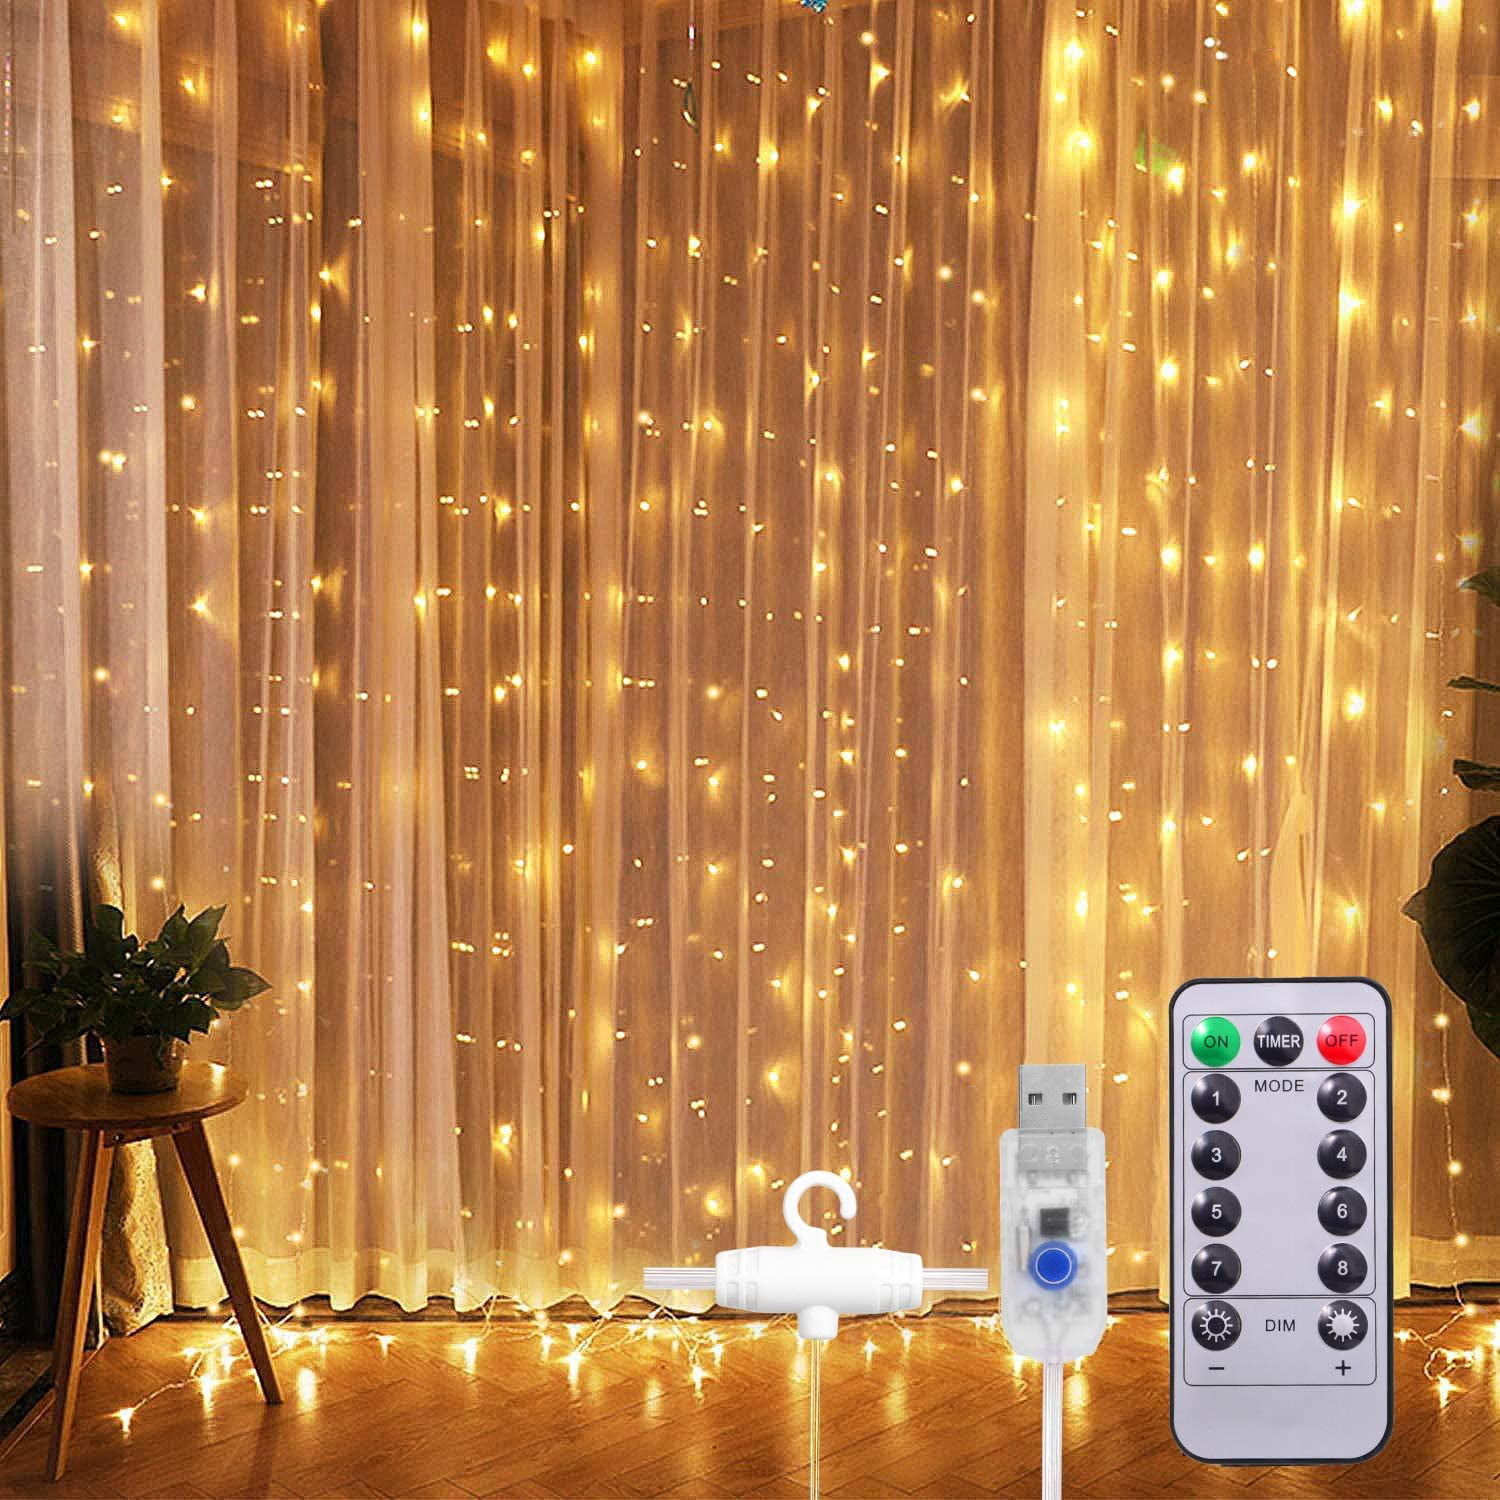 300 LED Curtain Fairy String Lights USB Home Window Bedroom Party Decor w/Remote 